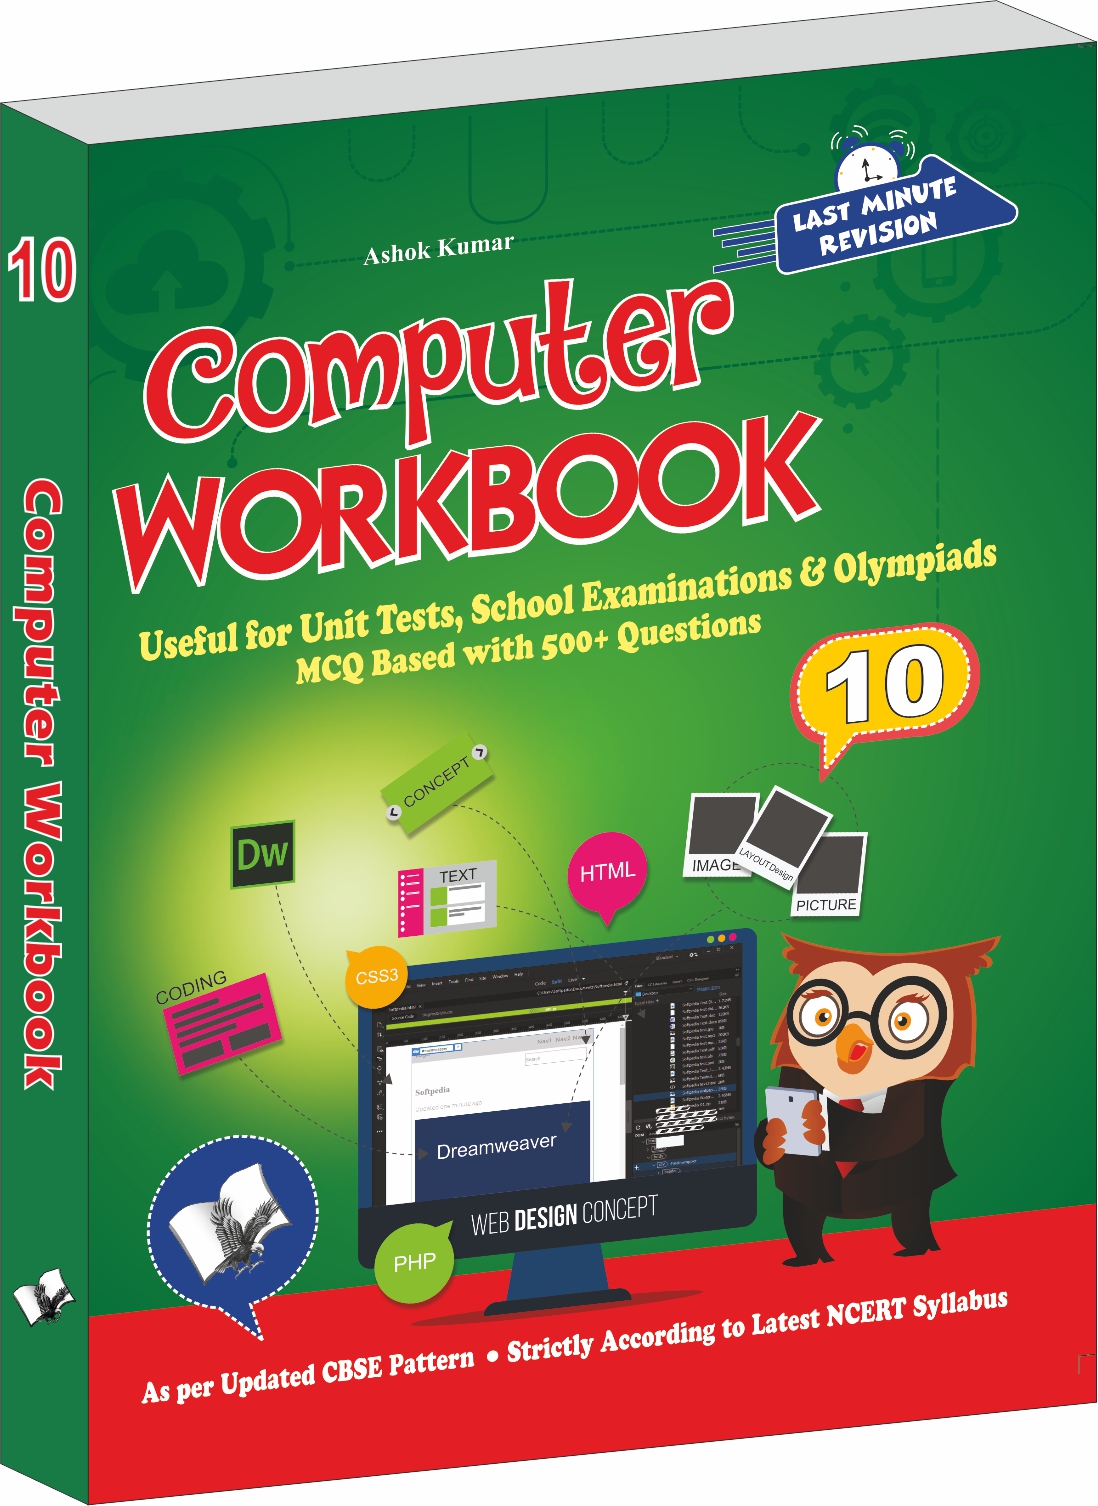 Computer Workbook Class 10-Useful for Unit Tests, School Examinations & Olympiads